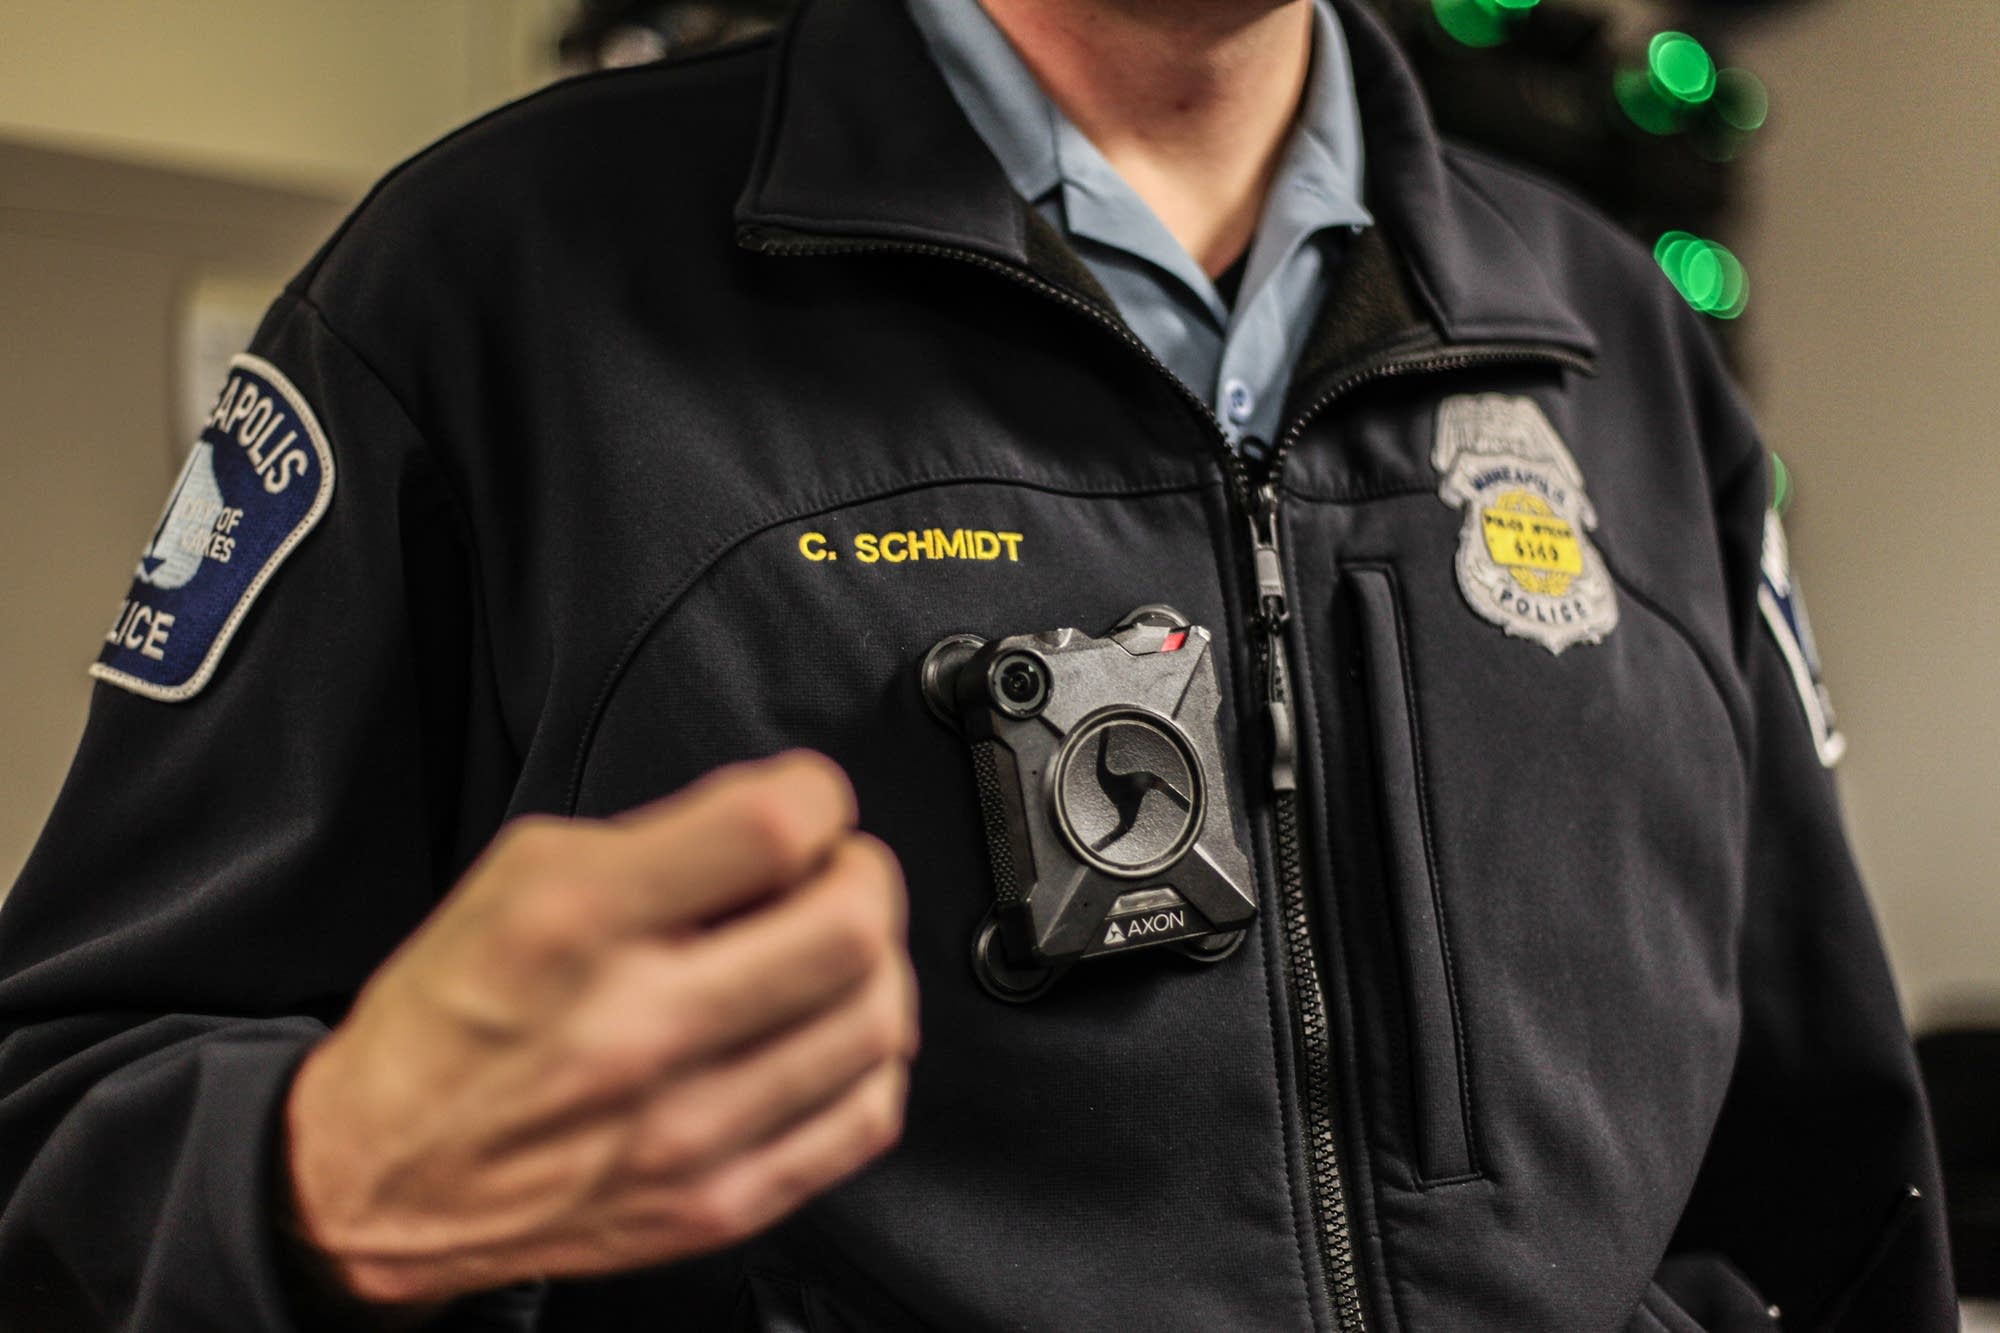 Mpls. police say most officers activate body cameras ...